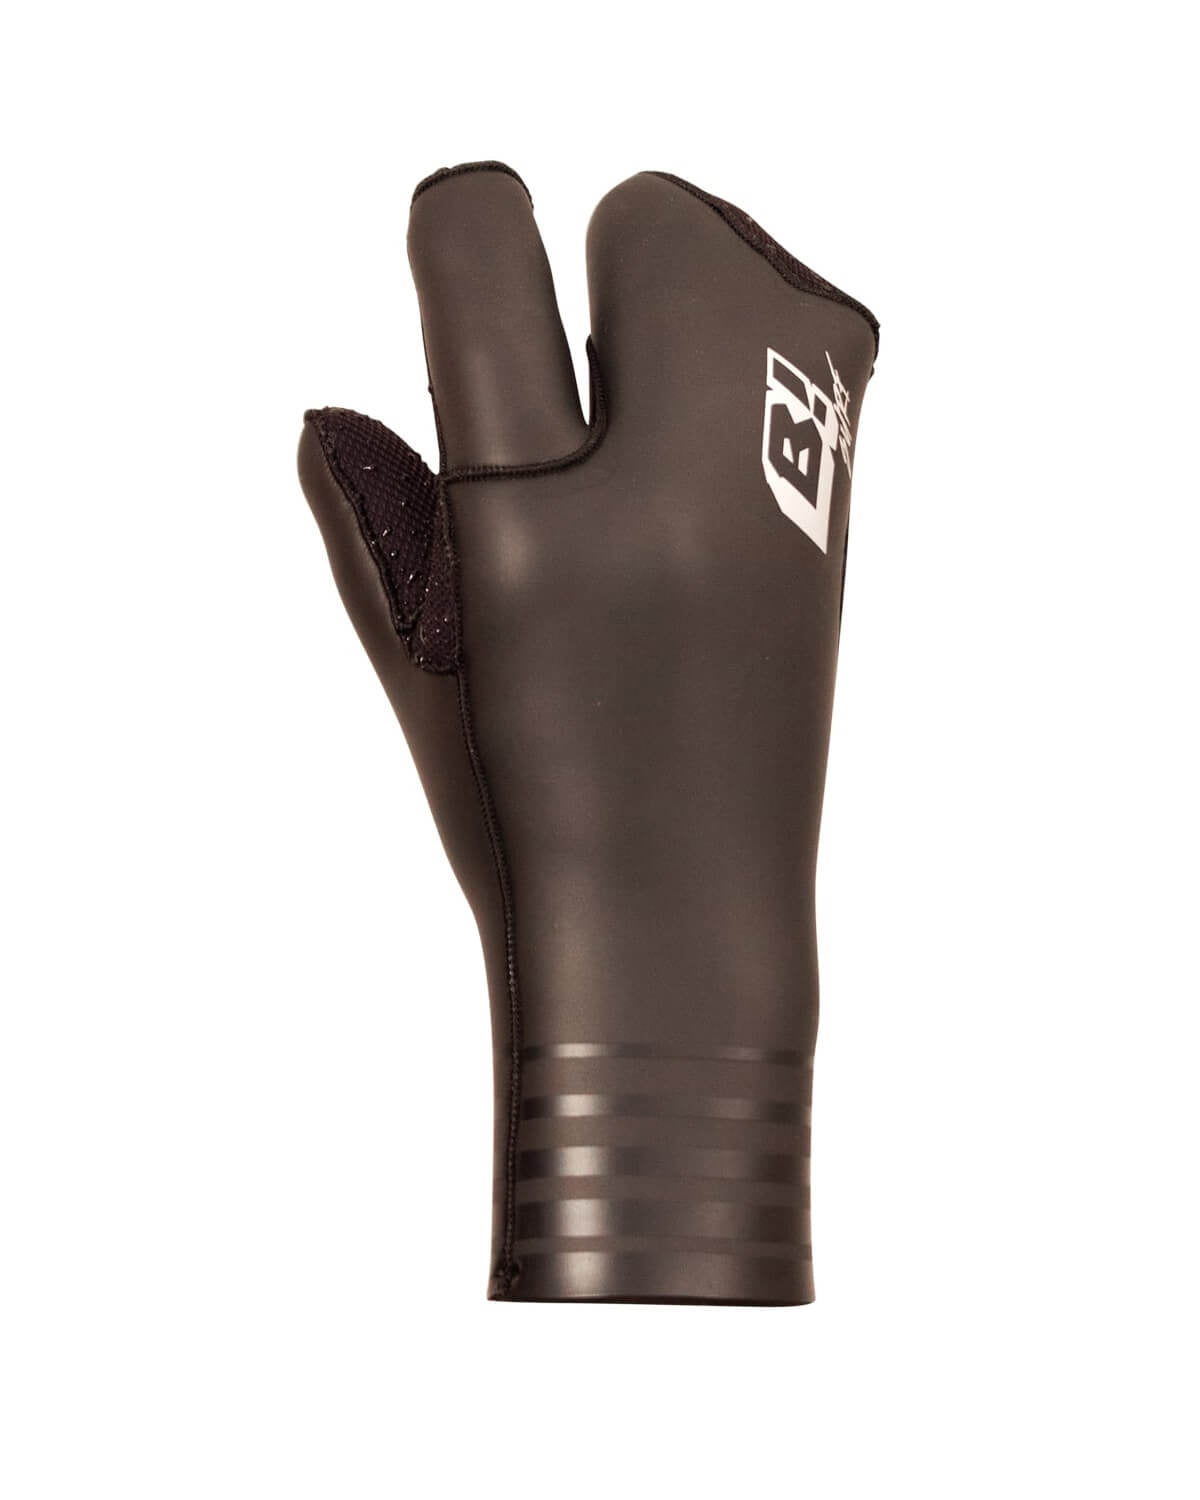 7mm Buell Lobster Wetsuit Gloves